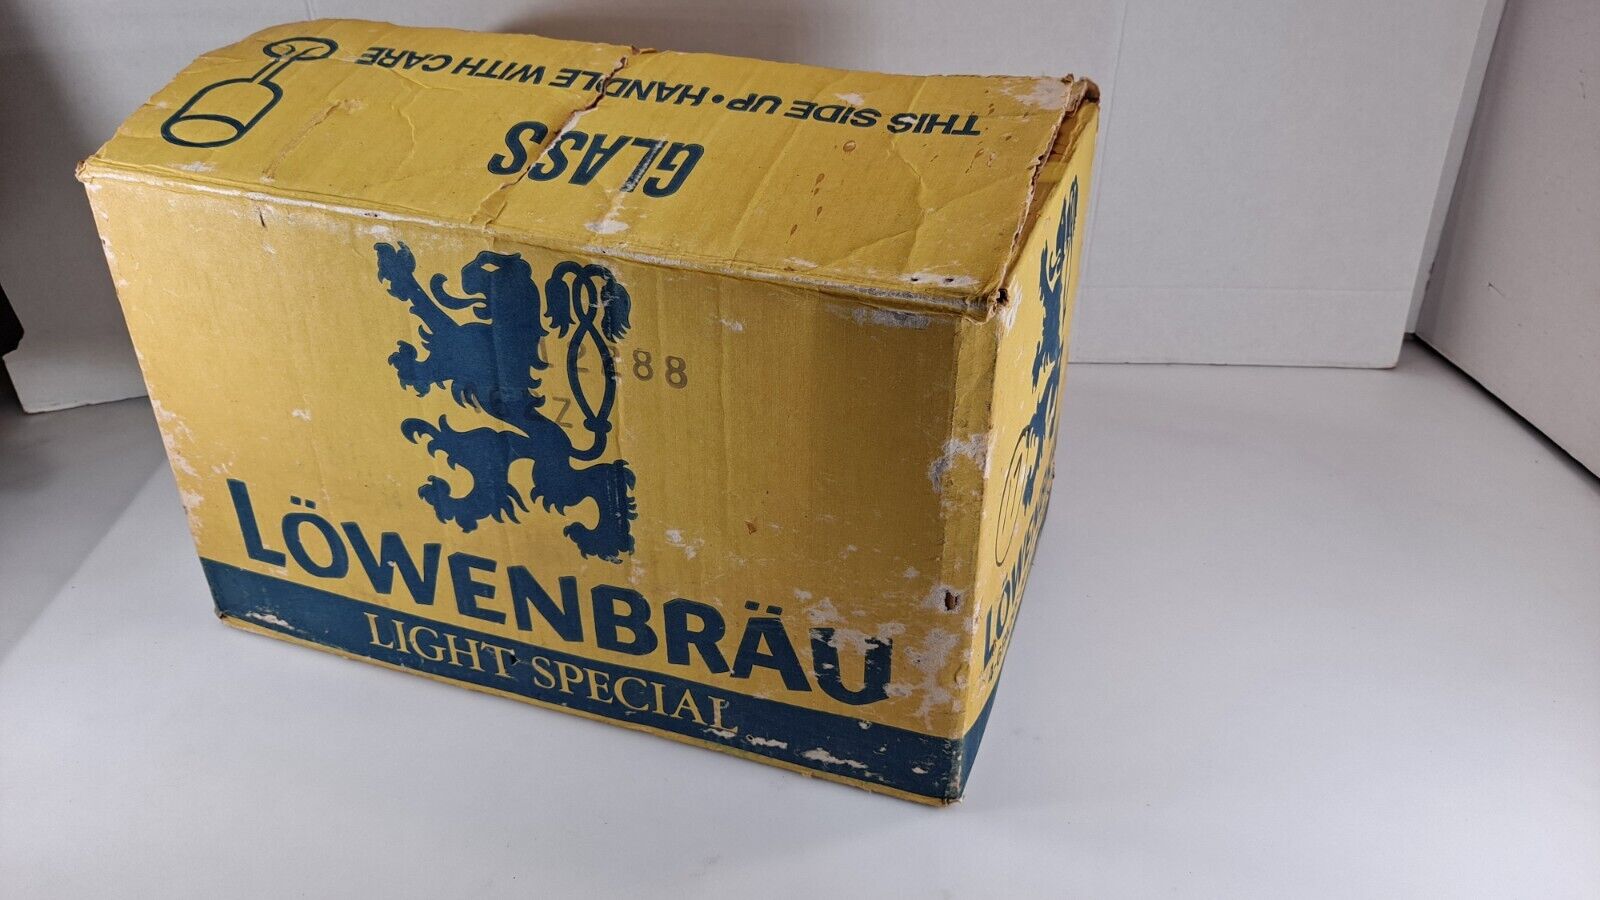 Vintage Lowenbrau Box (Case), Great for Man Cave